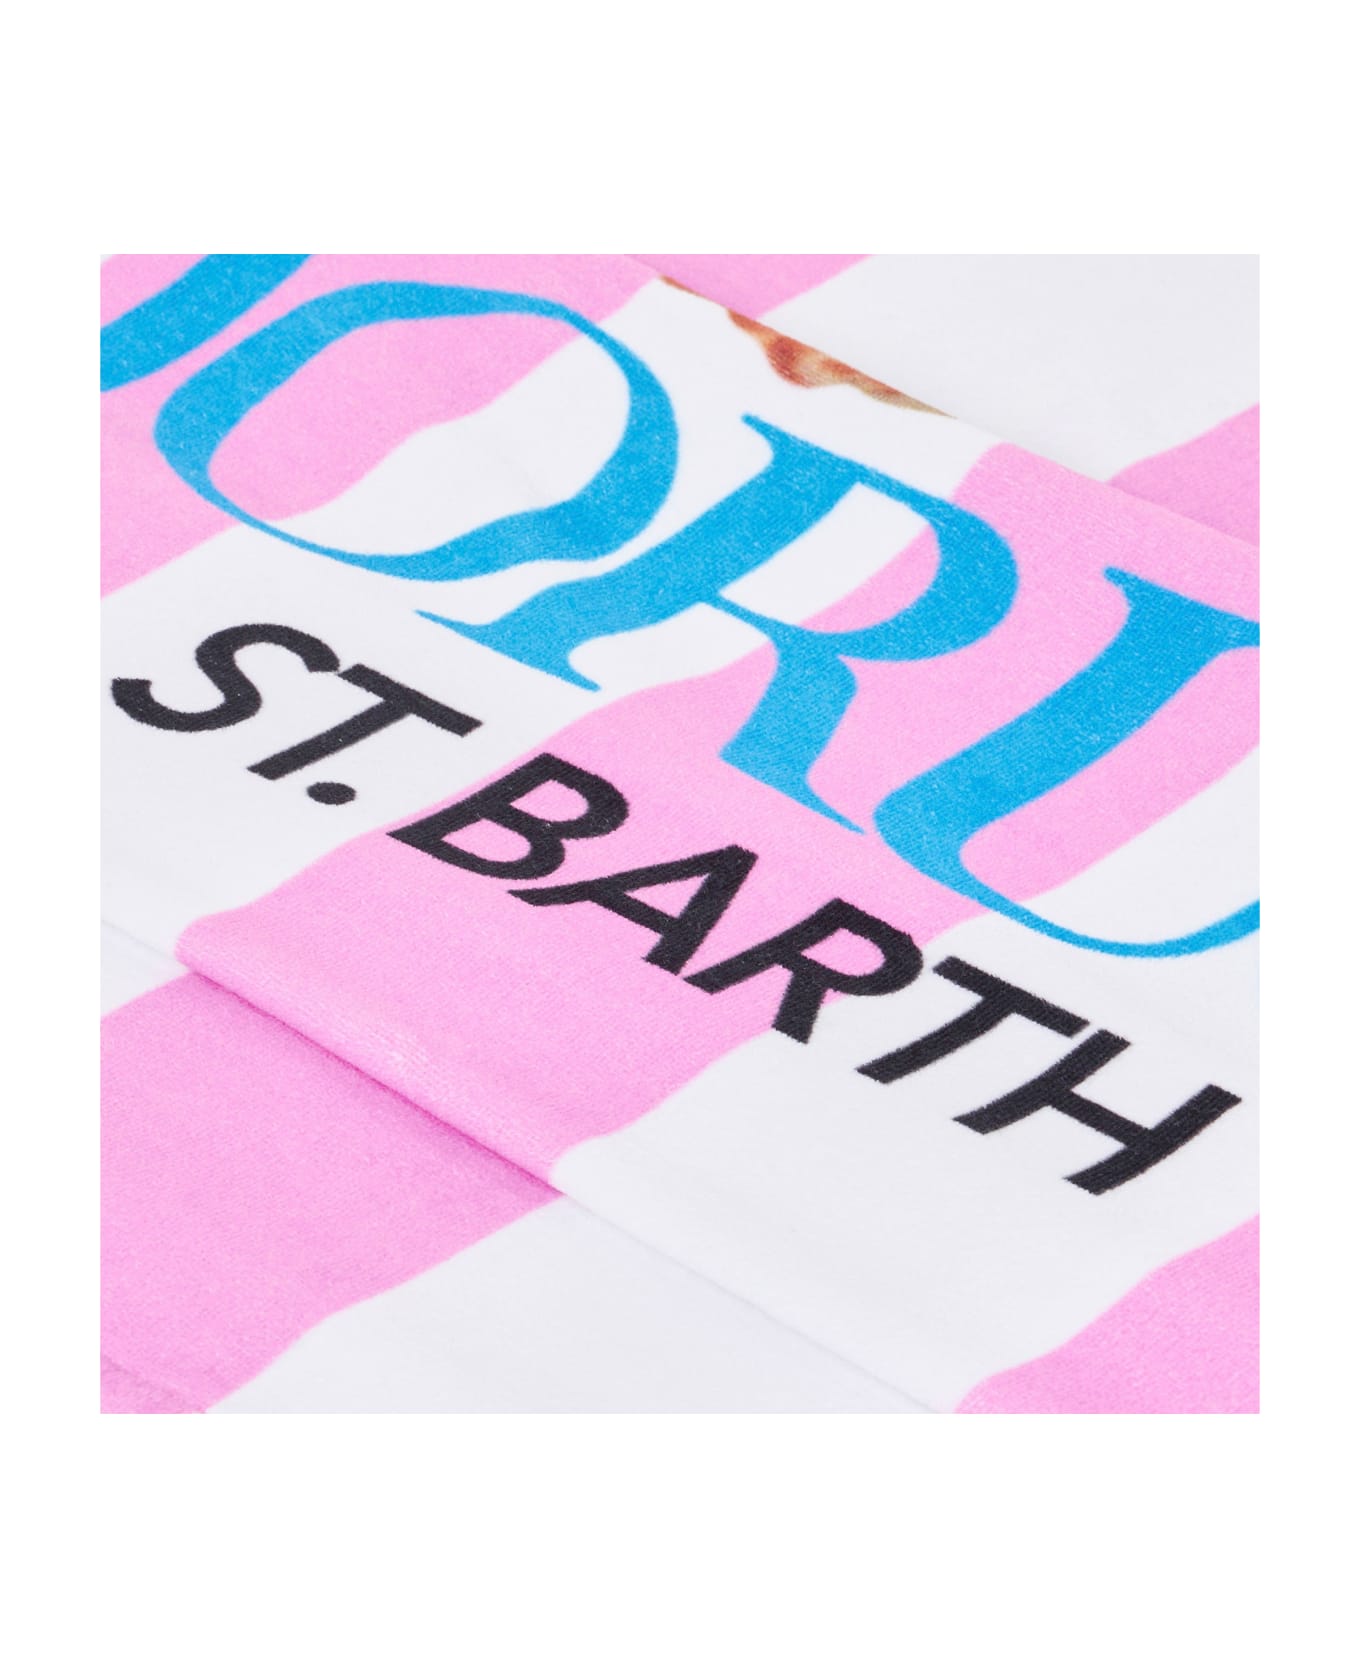 MC2 Saint Barth Printed Soft Terry Beach Towel With Stripes And Fiorucci Angels | Fiorucci Special Edition - PINK